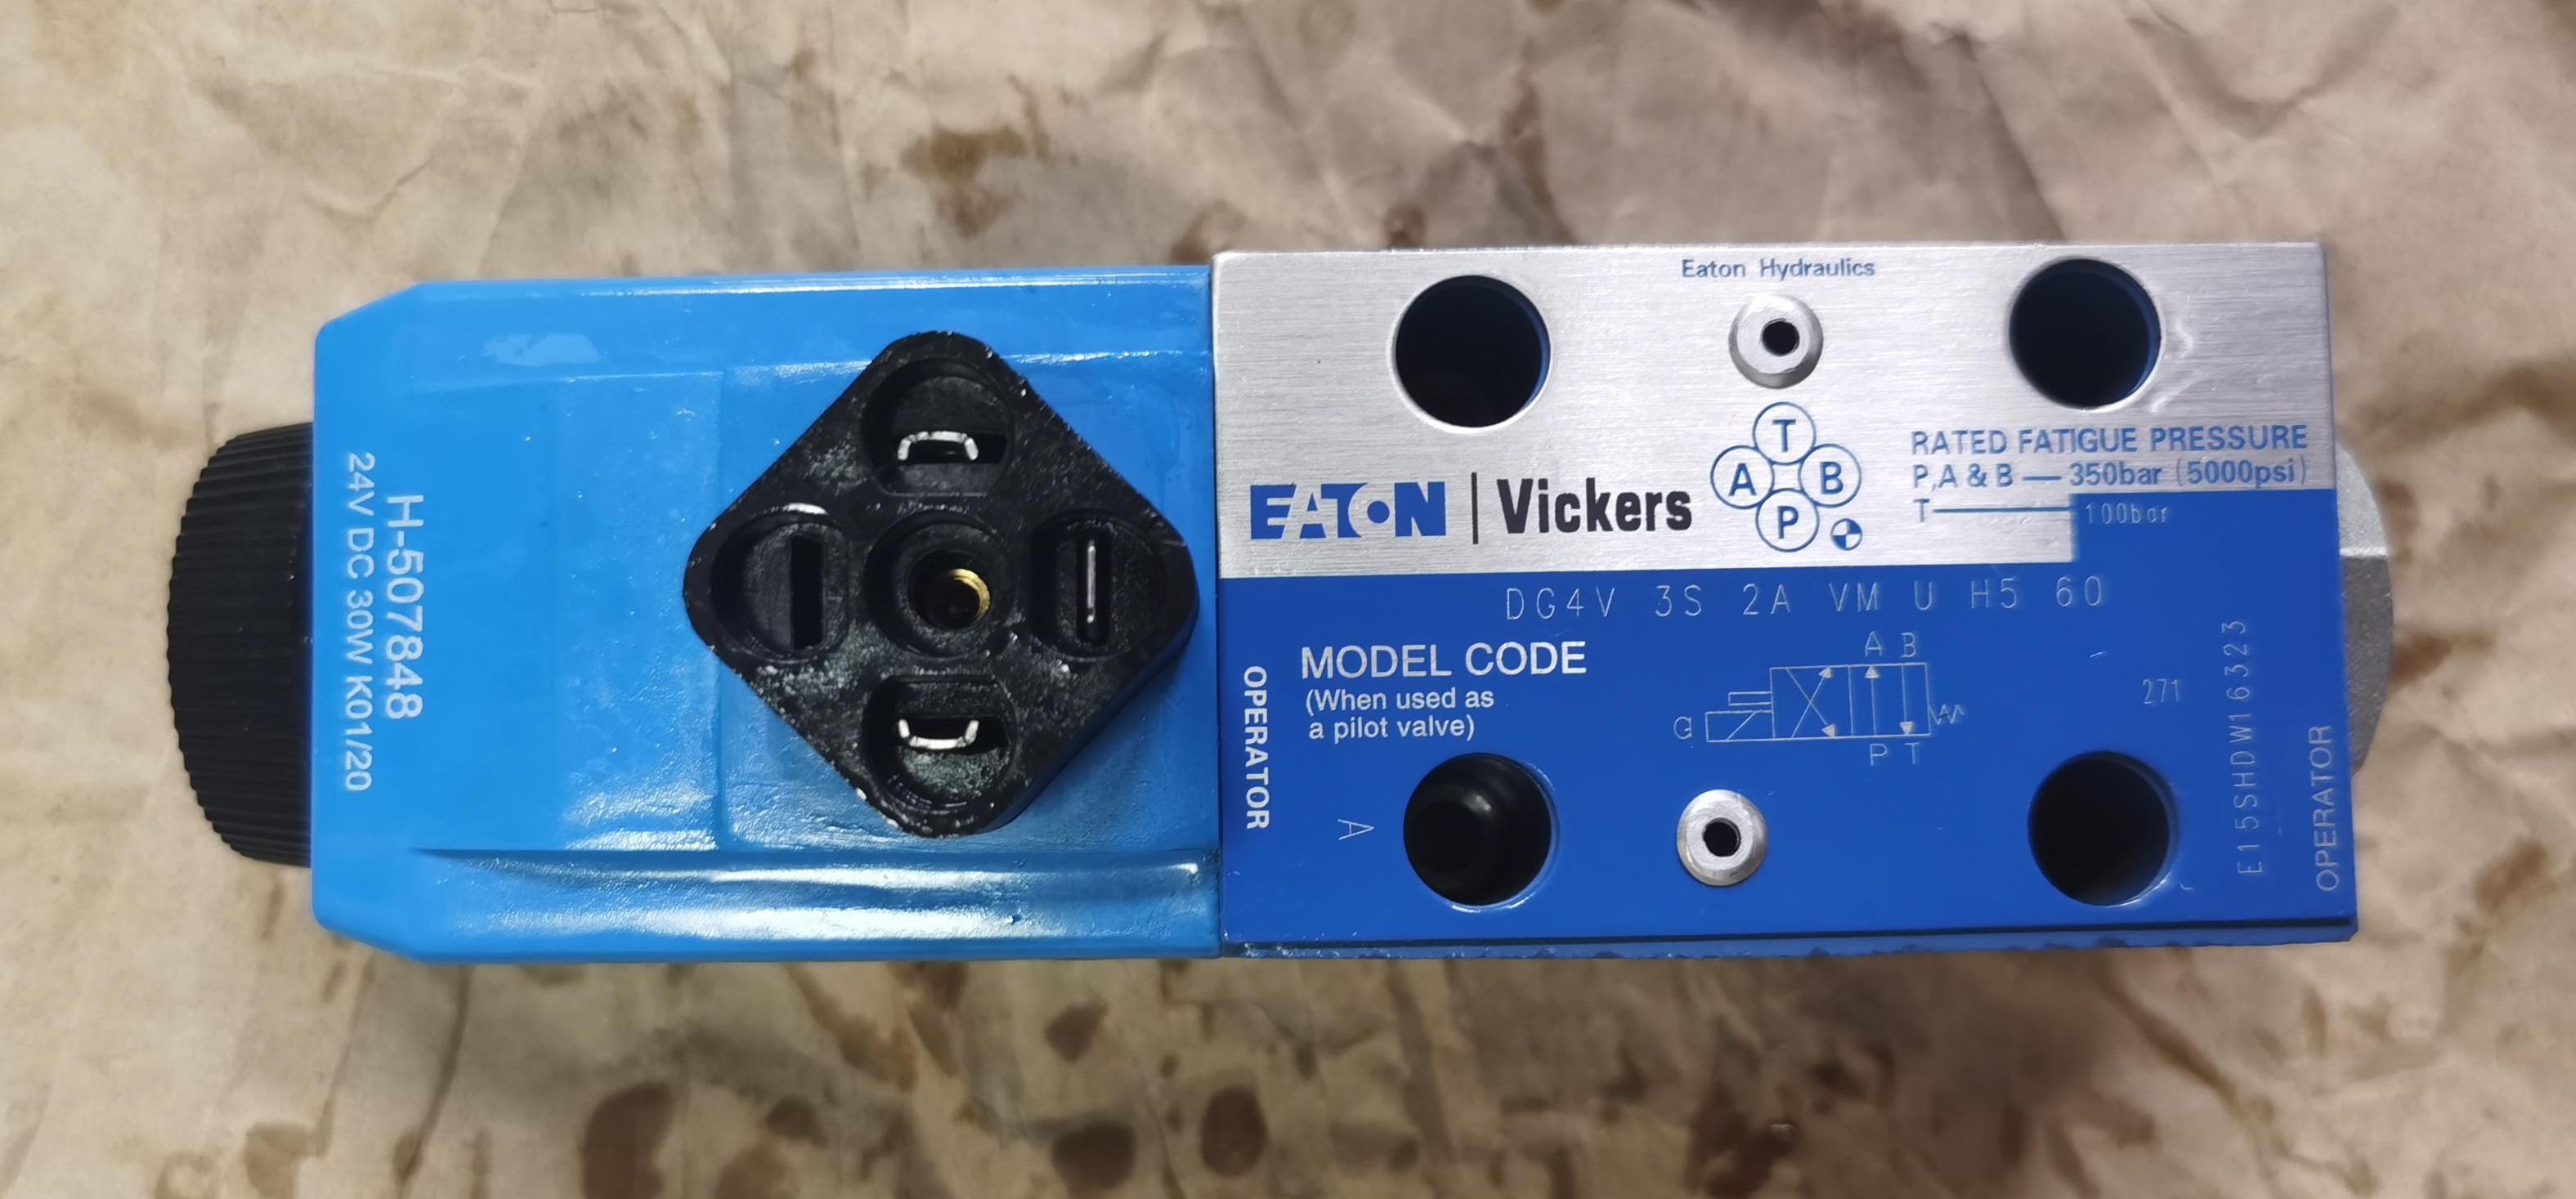 Eaton Vickers DG4V-3S-2A-VM-U-H5-60 Solenoid Operated Directional Control Valve for sale